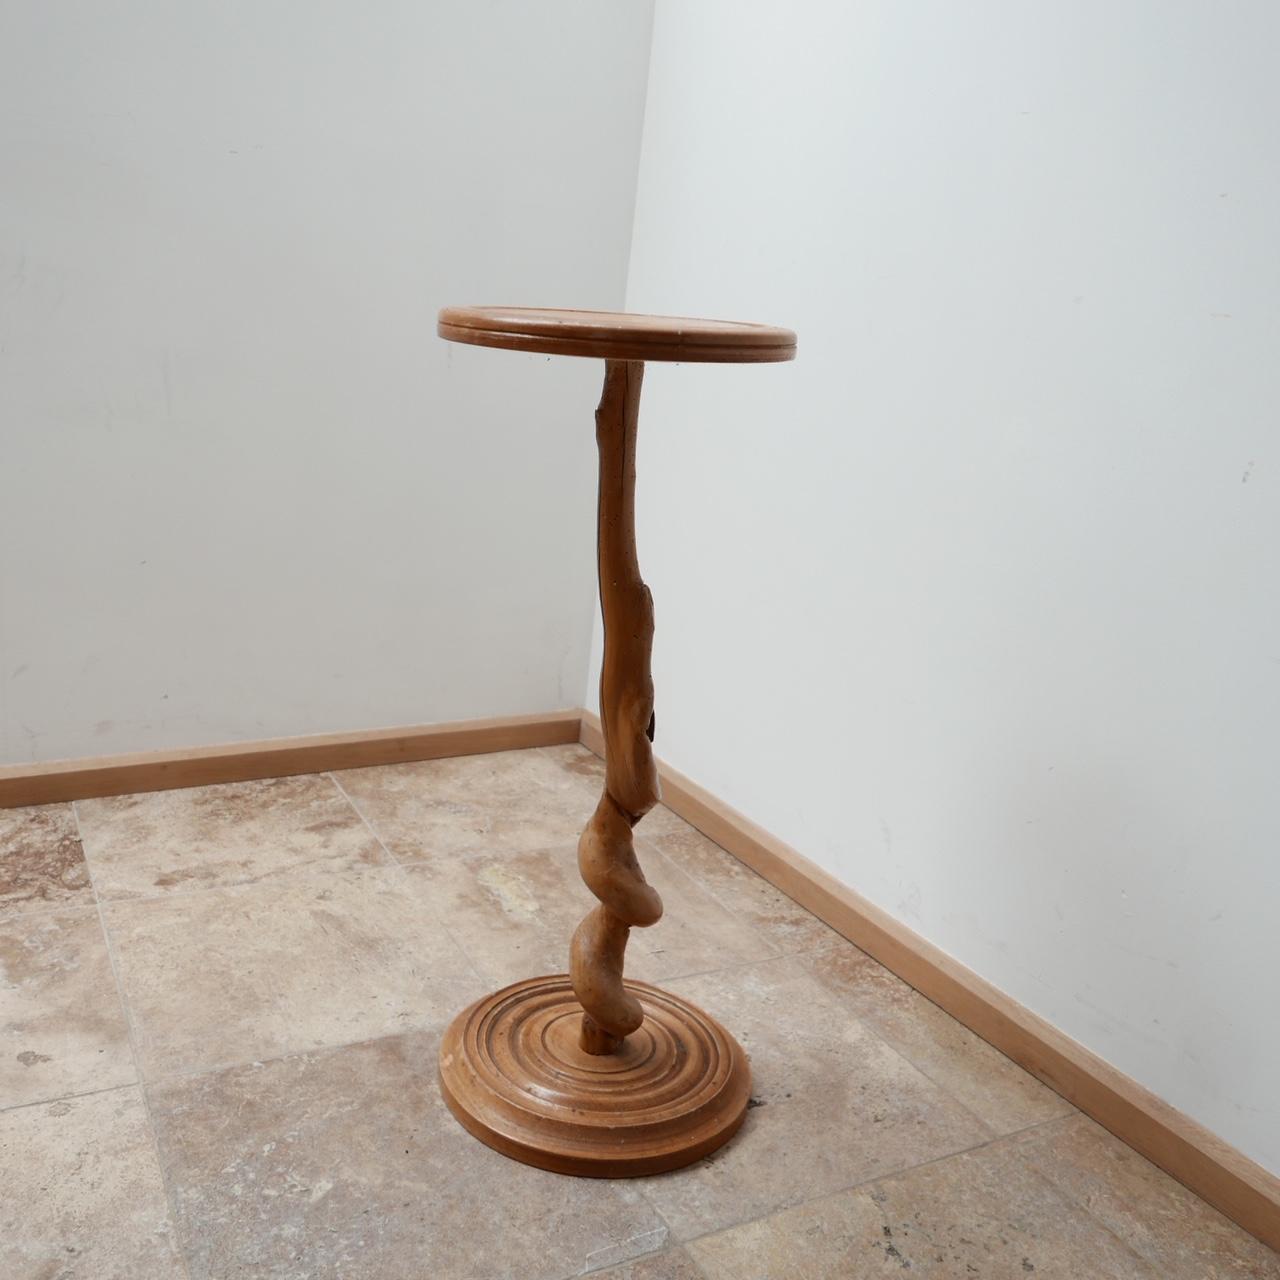 An unusual sculptural vine style side table lamp. 

Belgium, c1960s. 

Some evidence of historical wood worm since treated as a precaution. 

A similar table was also brought at the same time, and is available at the time of listing.